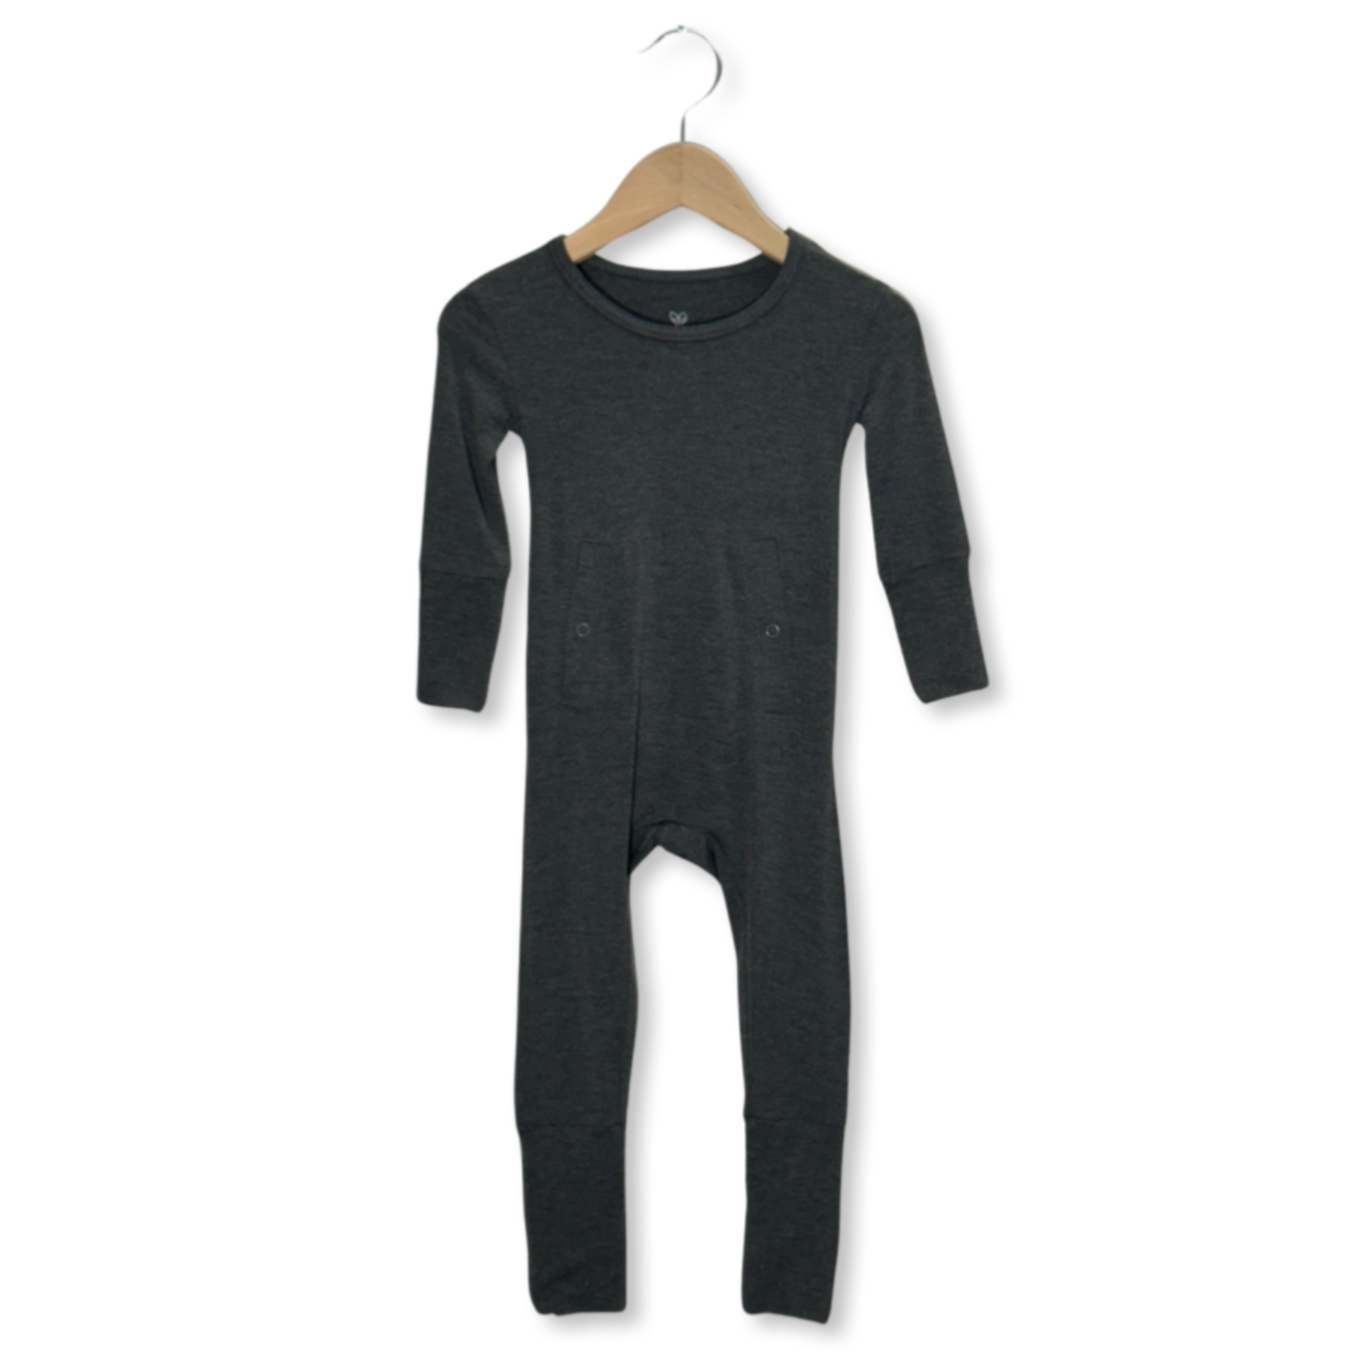 Charcoal Adaptive Tube Access with snaps Kid's Day to Night Romper